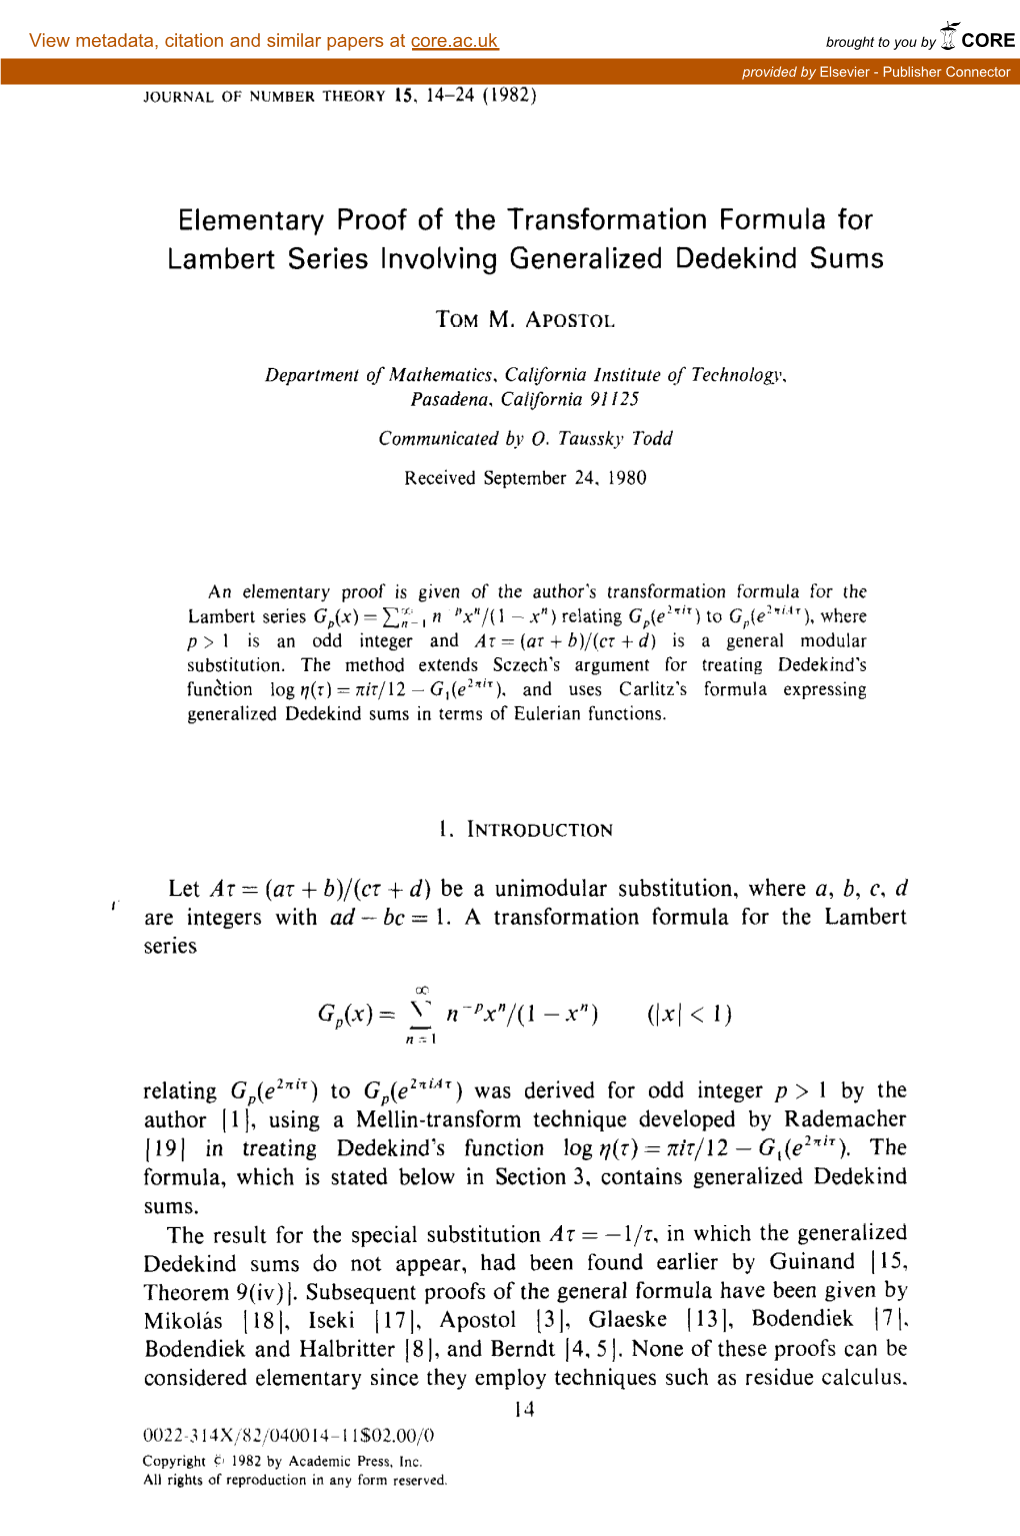 Elementary Proof of the Transformation Formula for Lambert Series Involving Generalized Dedekind Sums